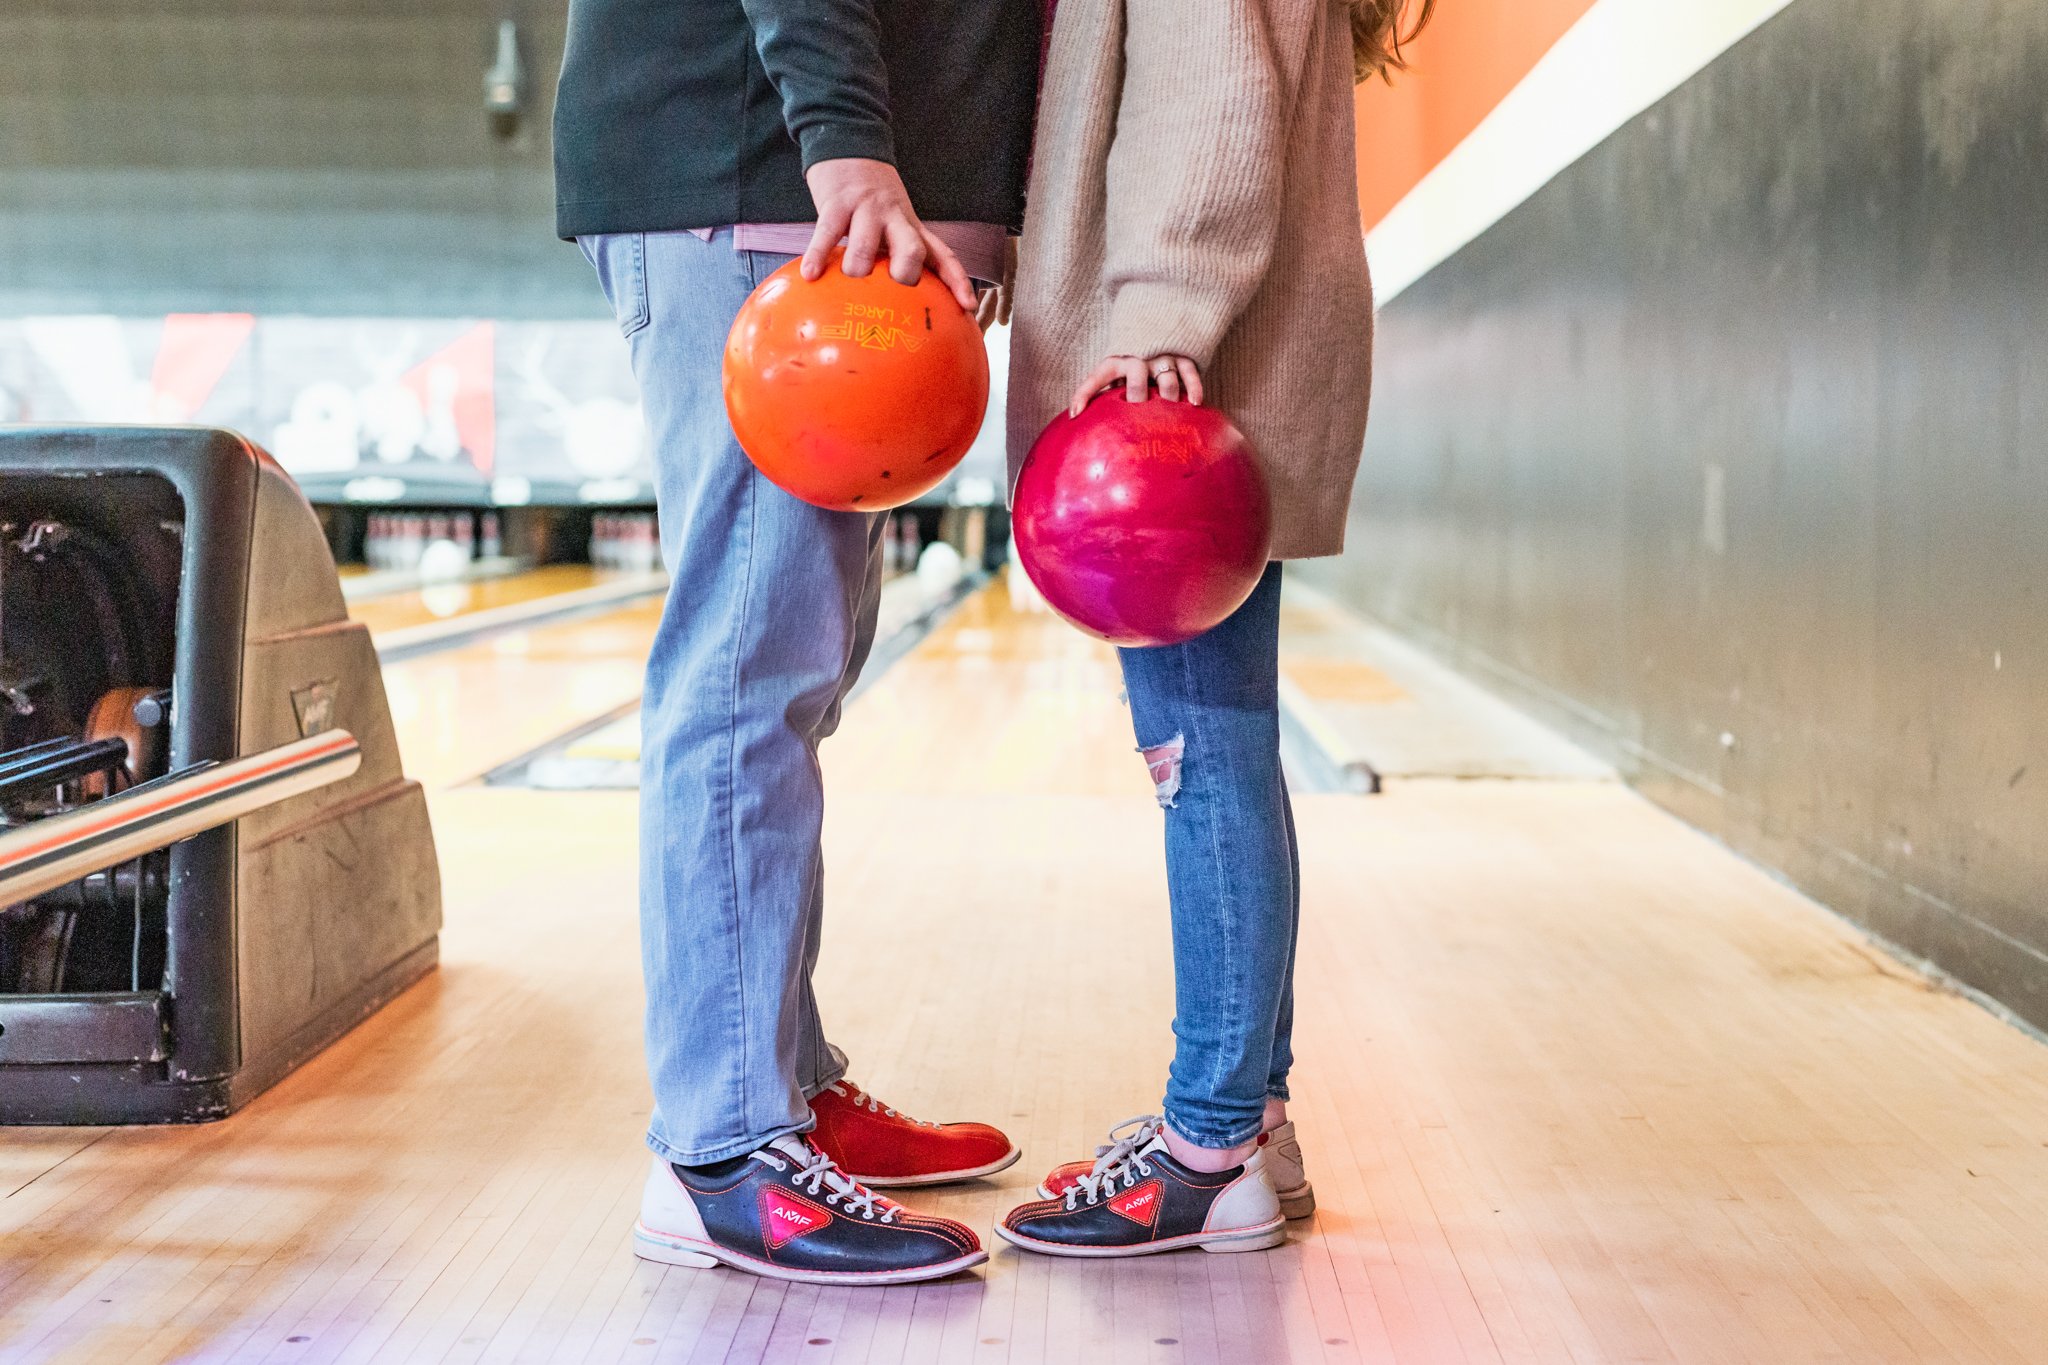 Bowling_Alley_Couples_Session_Nicole_Simensky_Photography-009.jpg